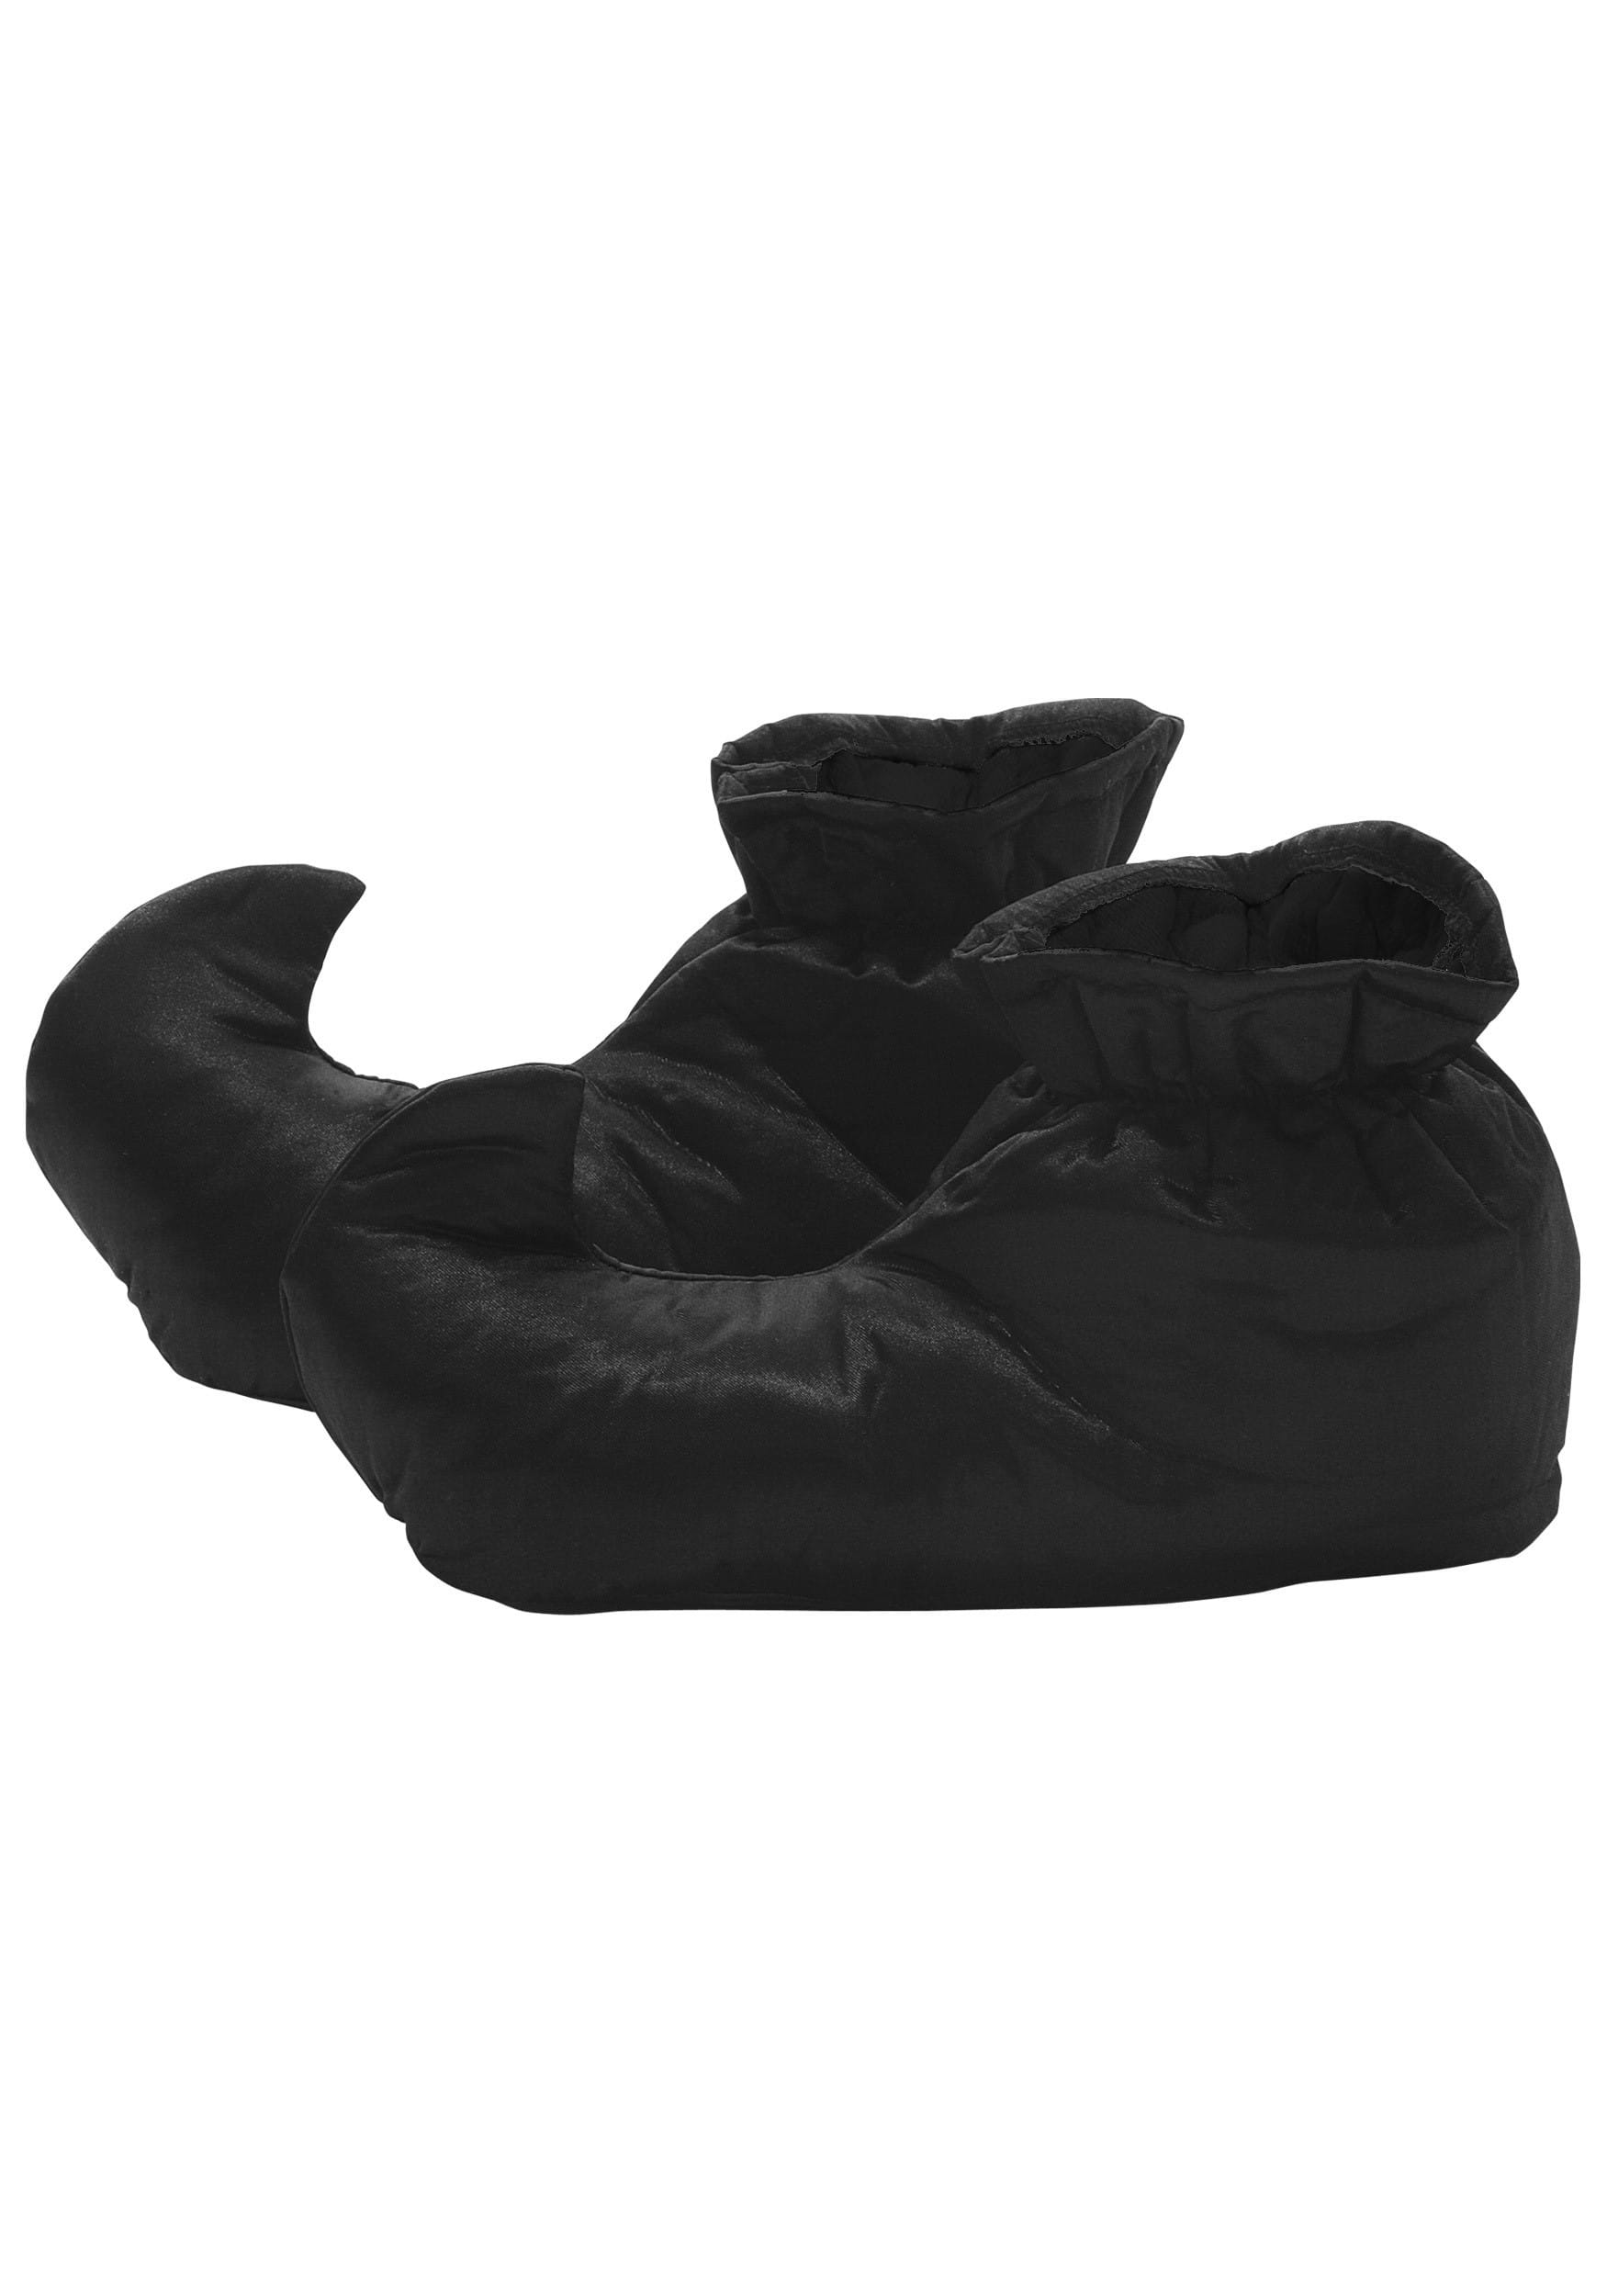 mens boot covers